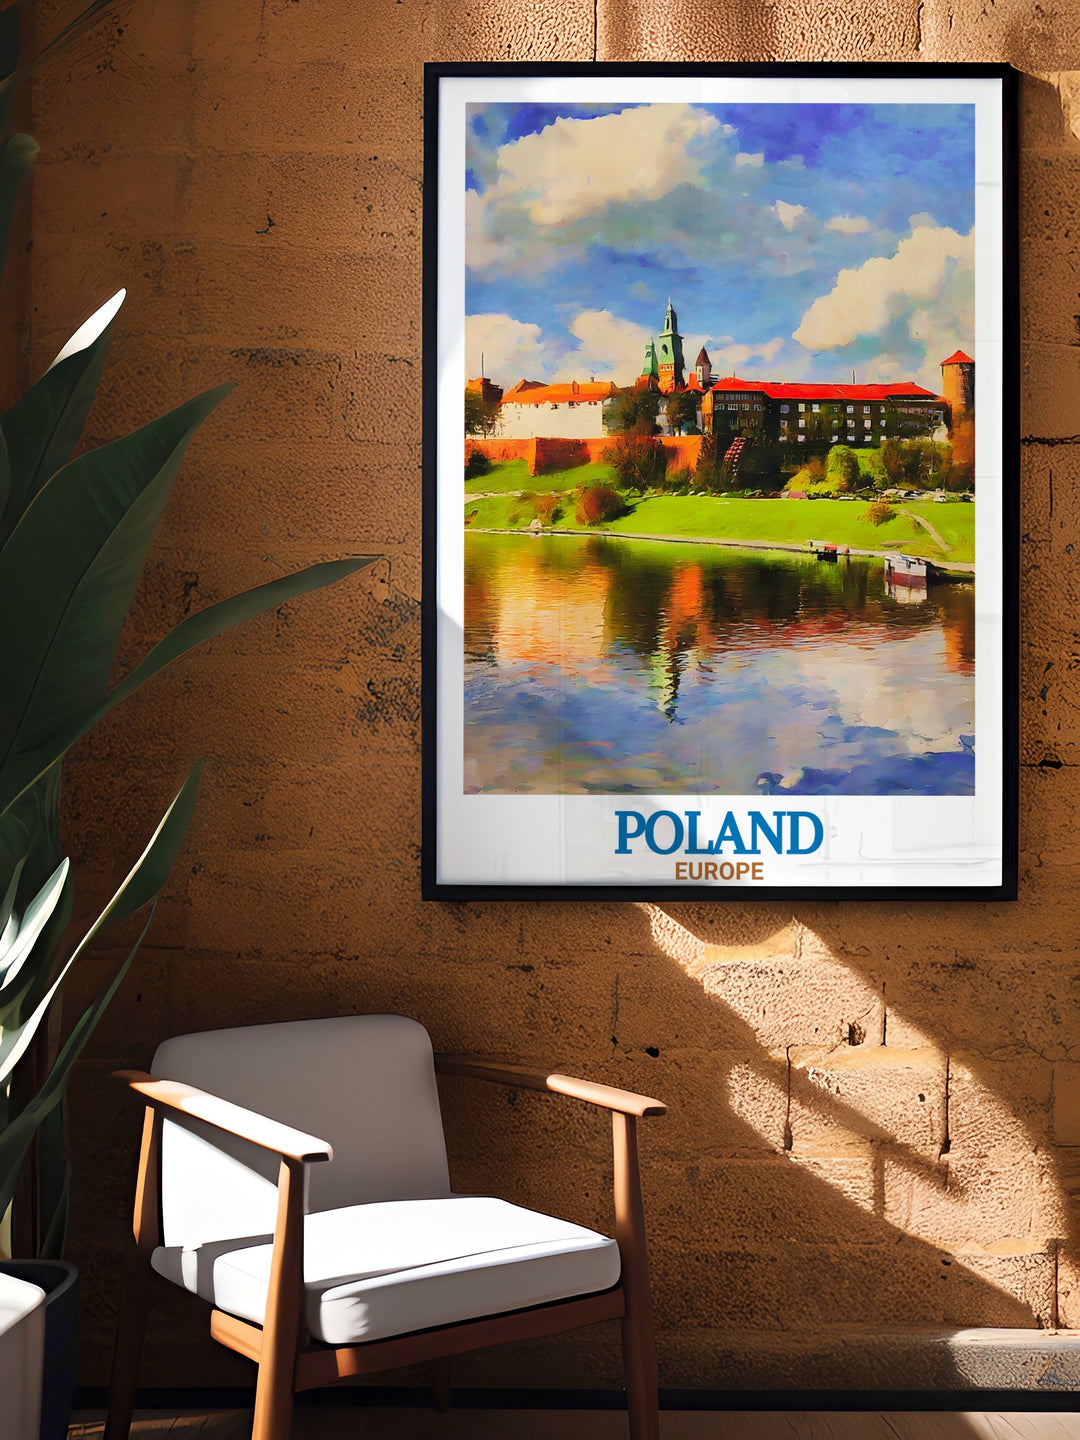 Travel Poster Print featuring Wawel Castle and Zakopane Cityscape perfect for art enthusiasts and travelers looking for unique and personalized gifts adds a touch of elegance to any living space